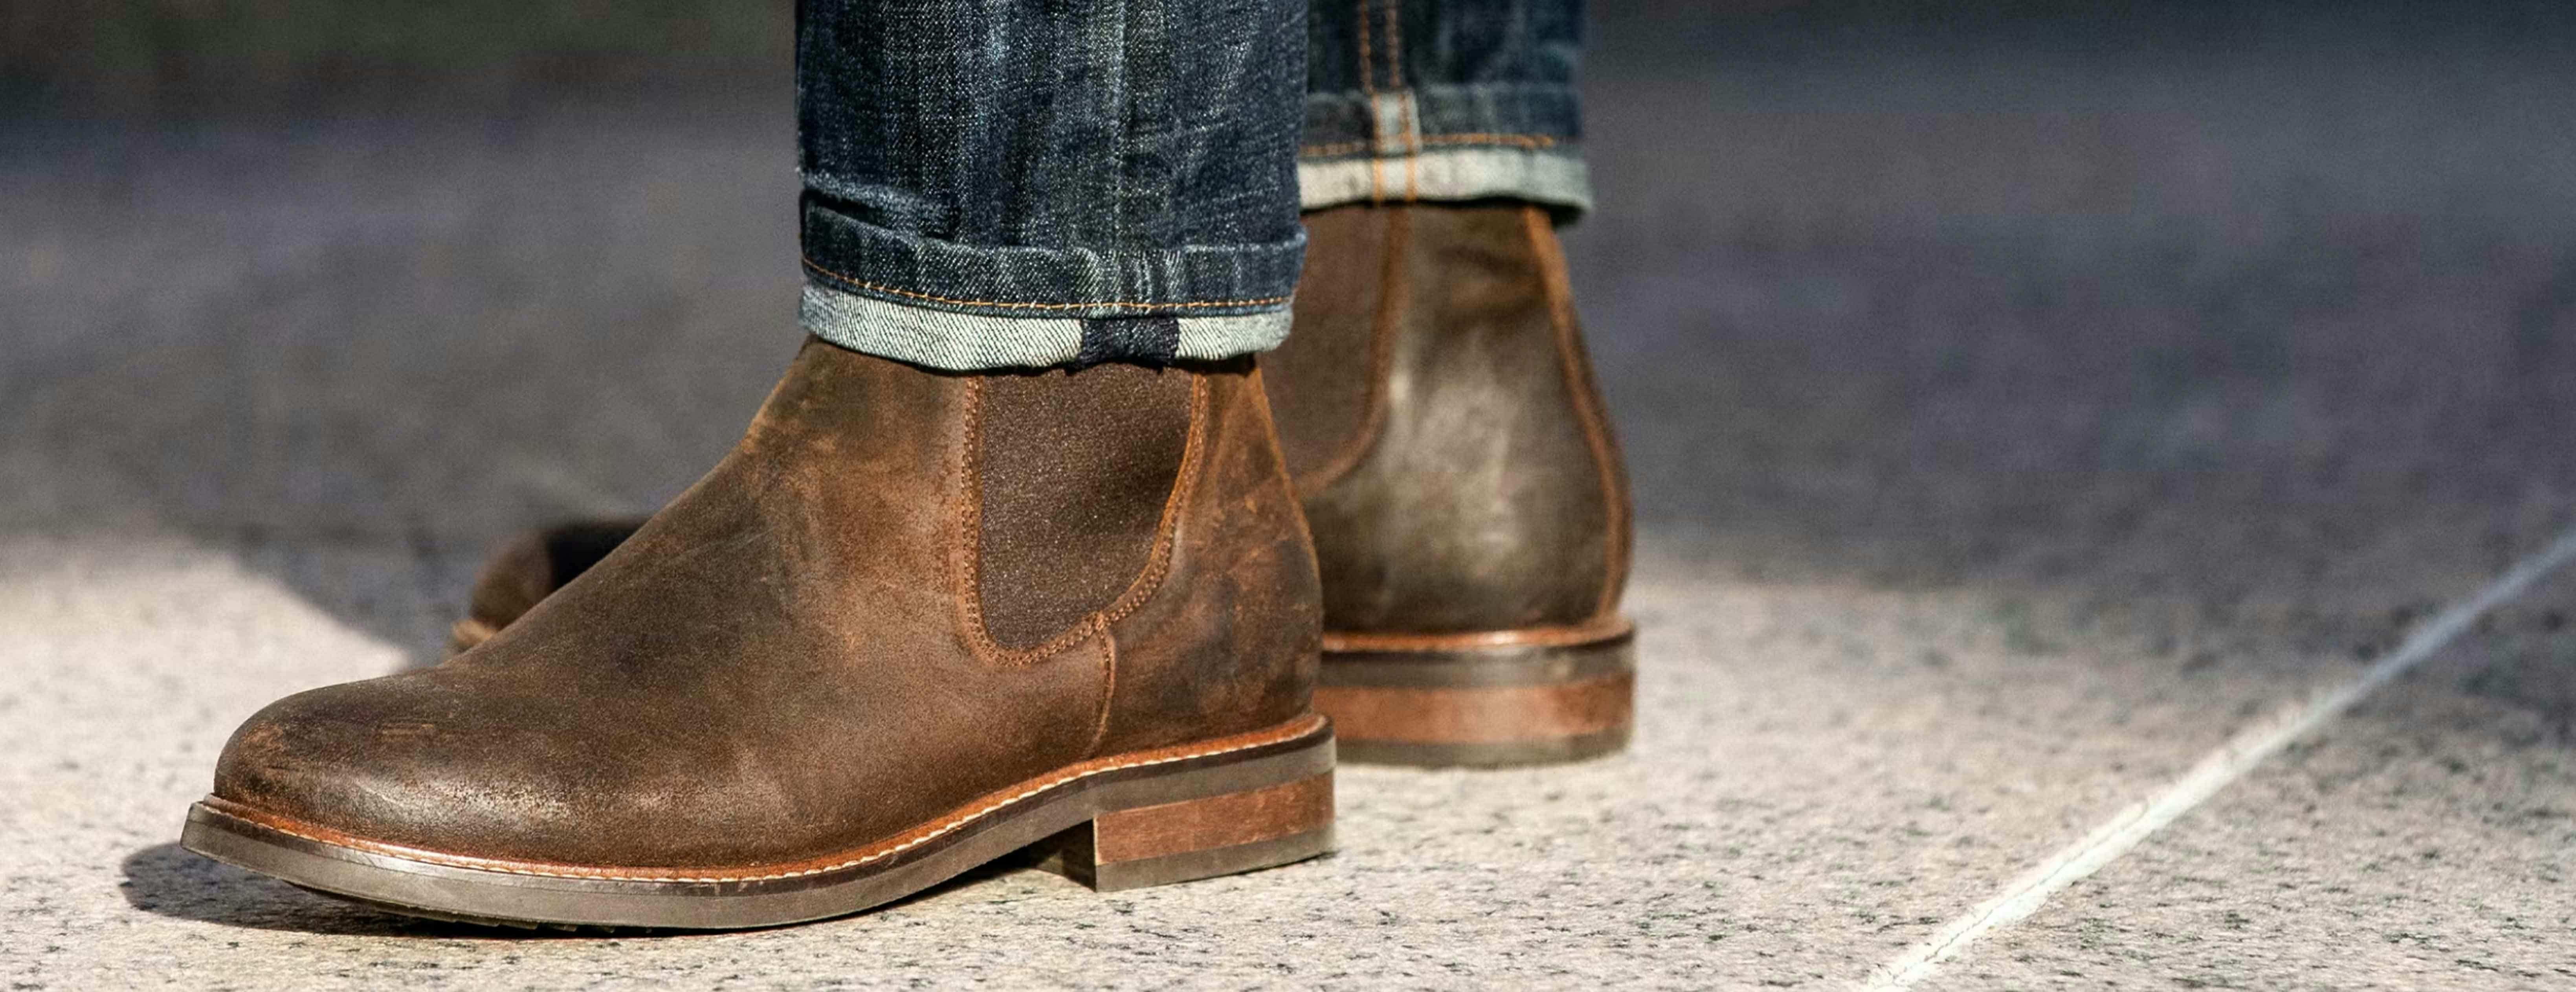 How To Wear & Style Men's Chelsea Boots